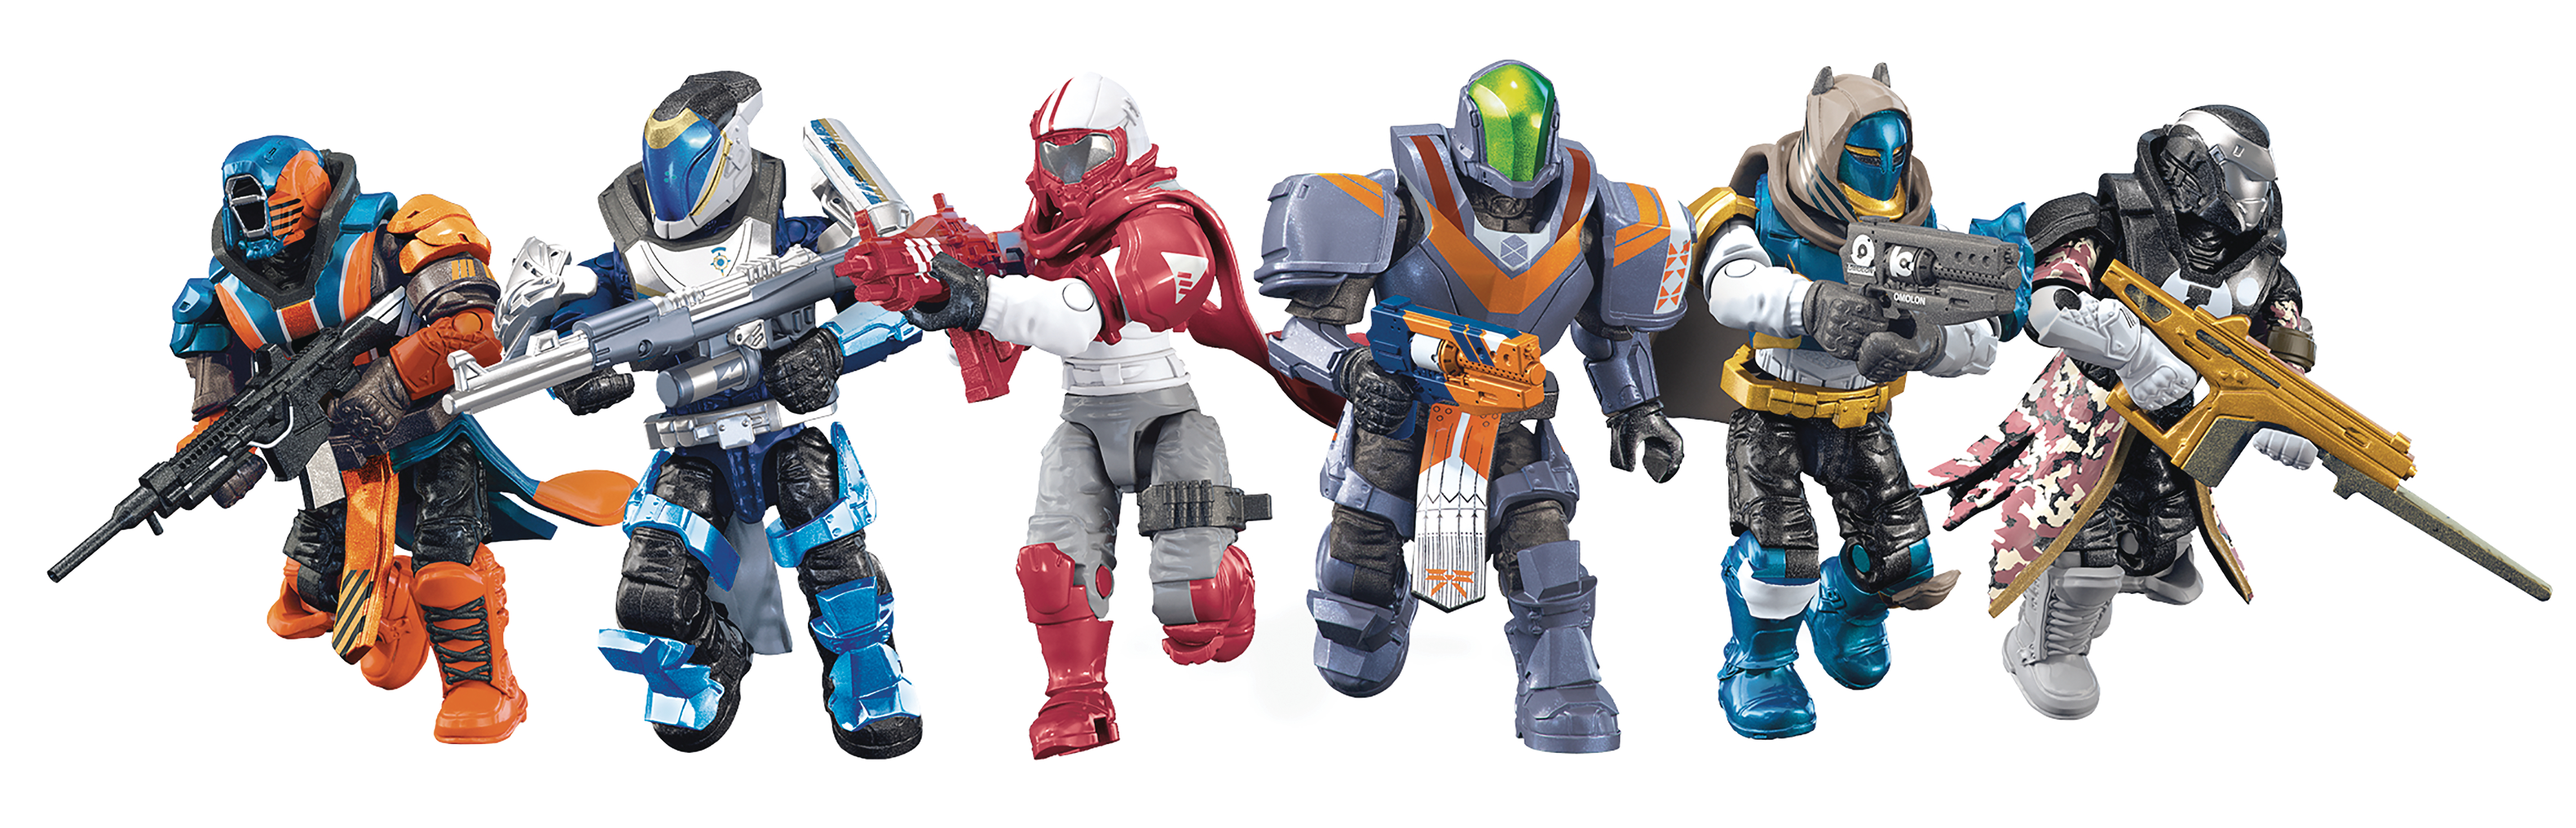 New Mega Bloks Destiny Fallen Walker Action Figures and Statues Toys And Games 